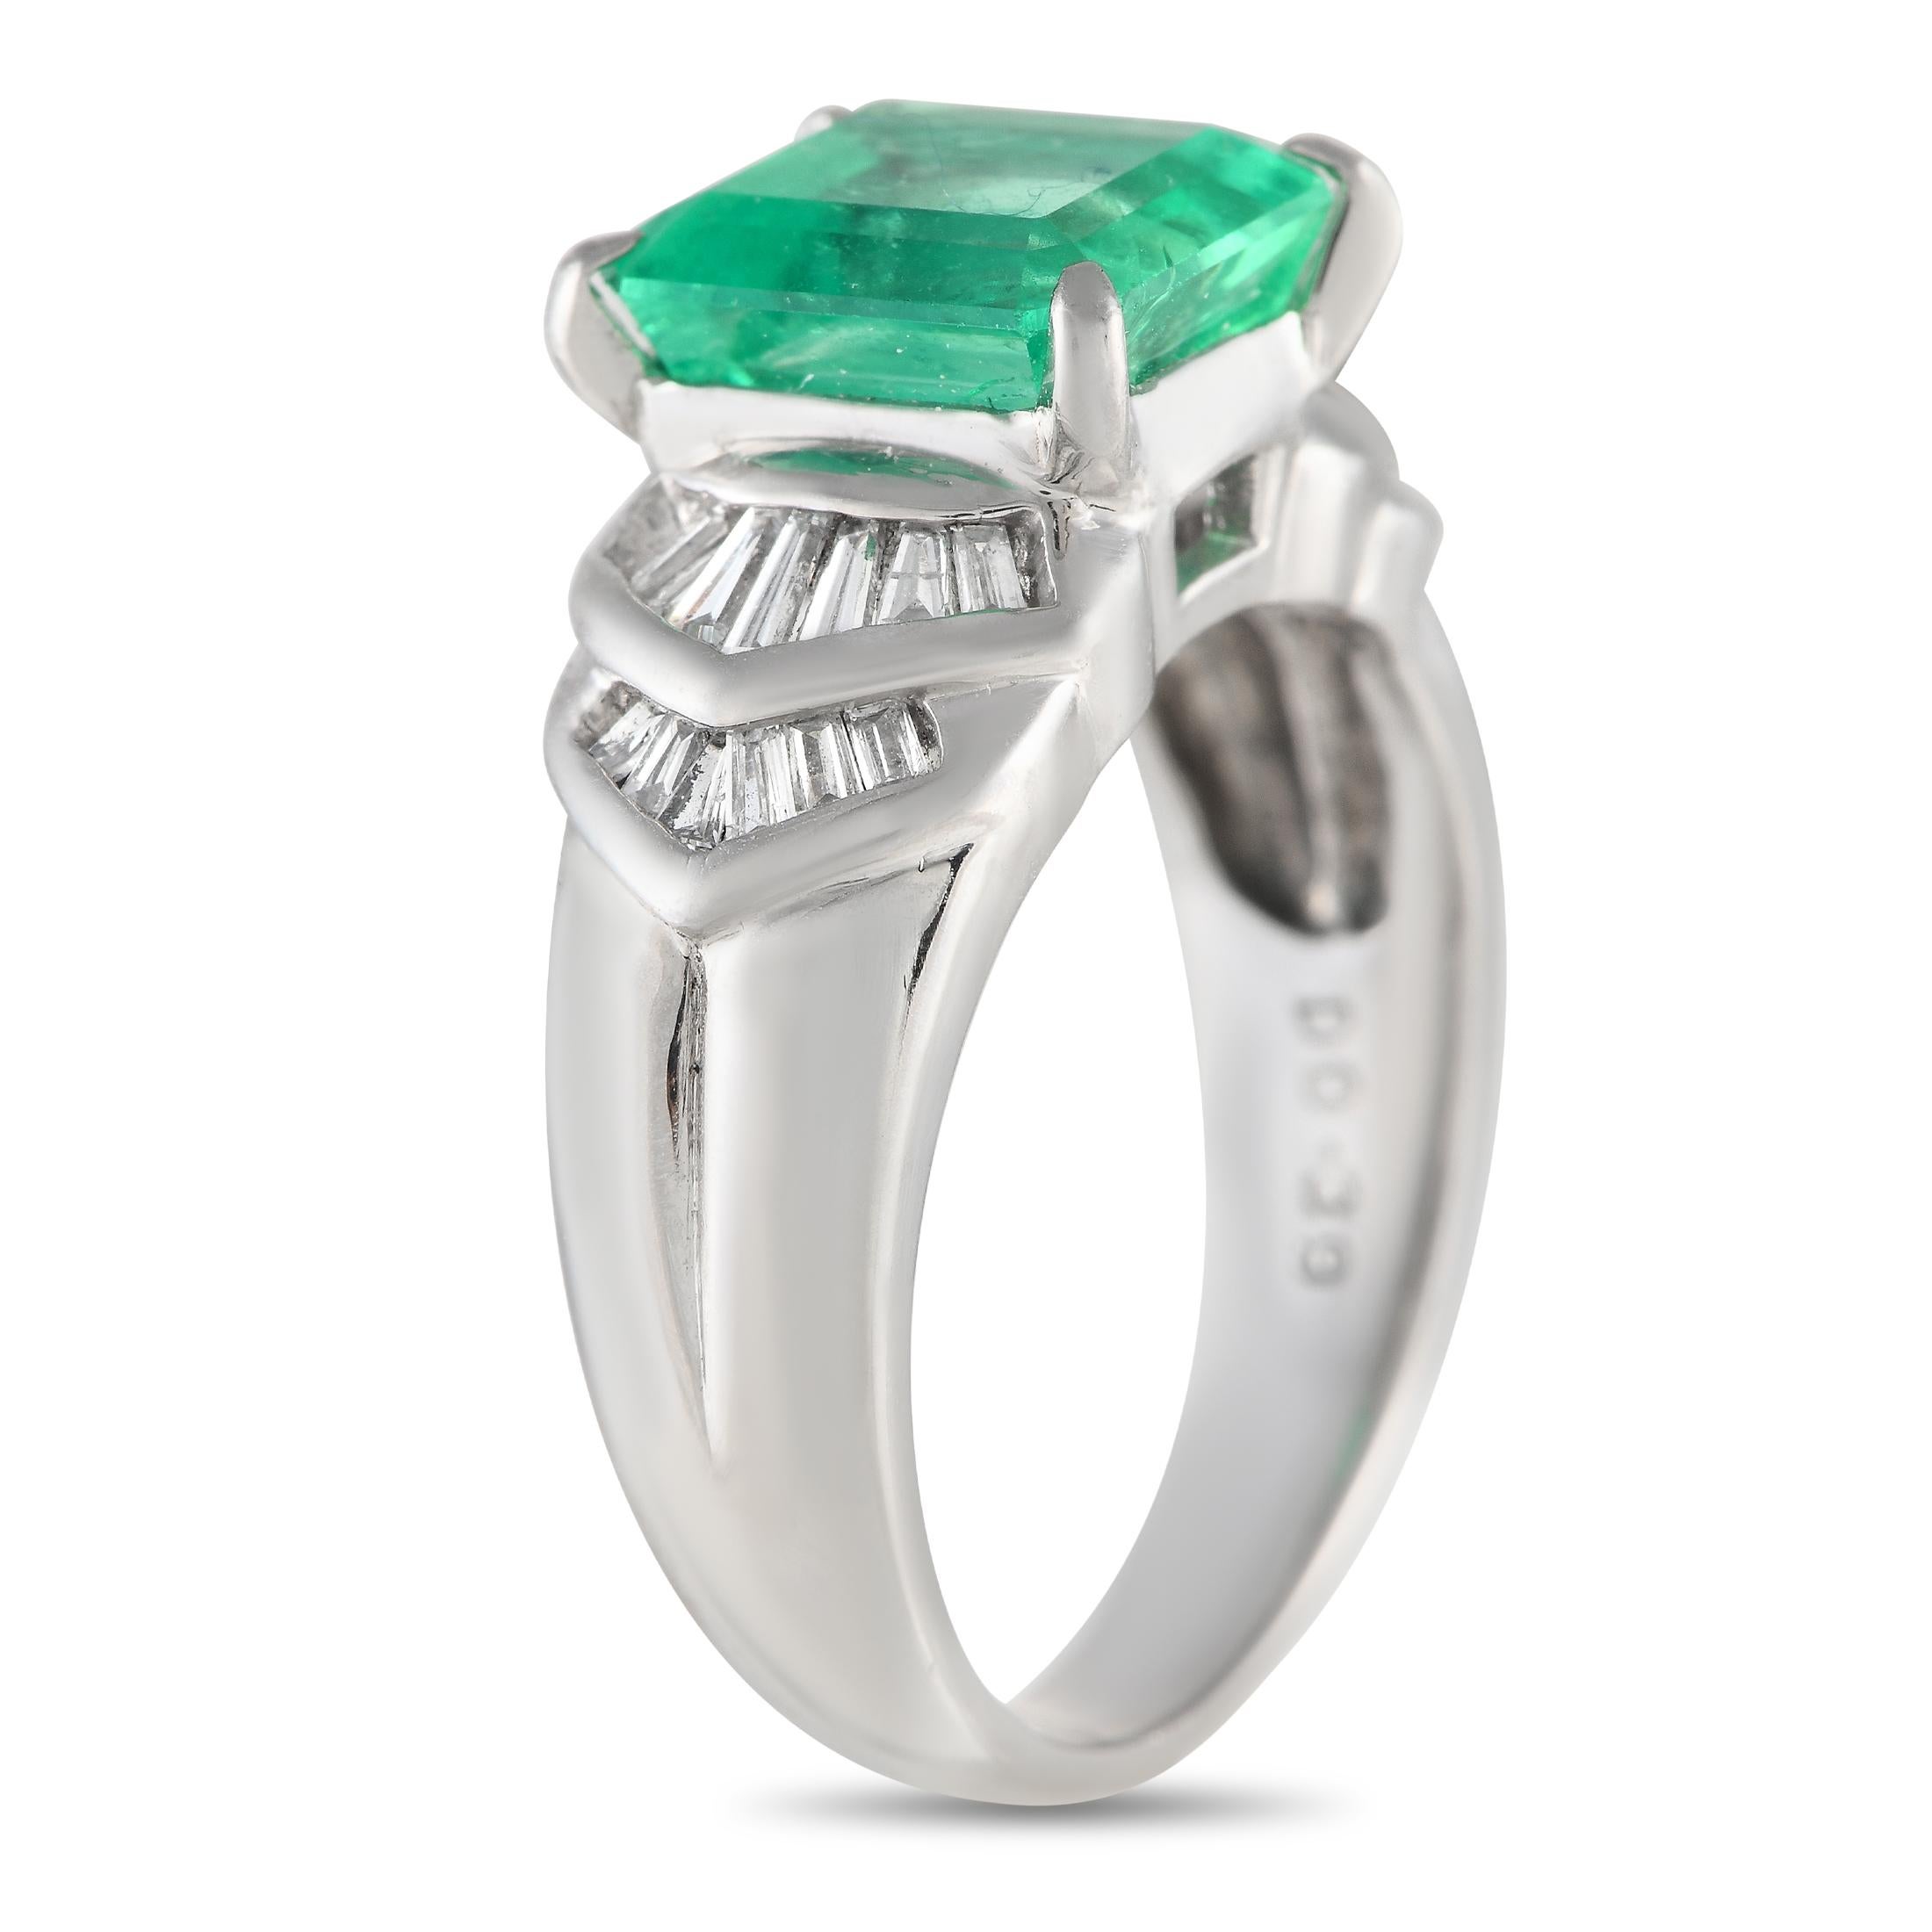 Wear the May birthstone proud with this diamond and emerald wide band ring. It features a 4mm platinum band that widens on top to accommodate a large emerald central stone flanked by a double chevron pattern of tapered step-cut diamonds. The ring